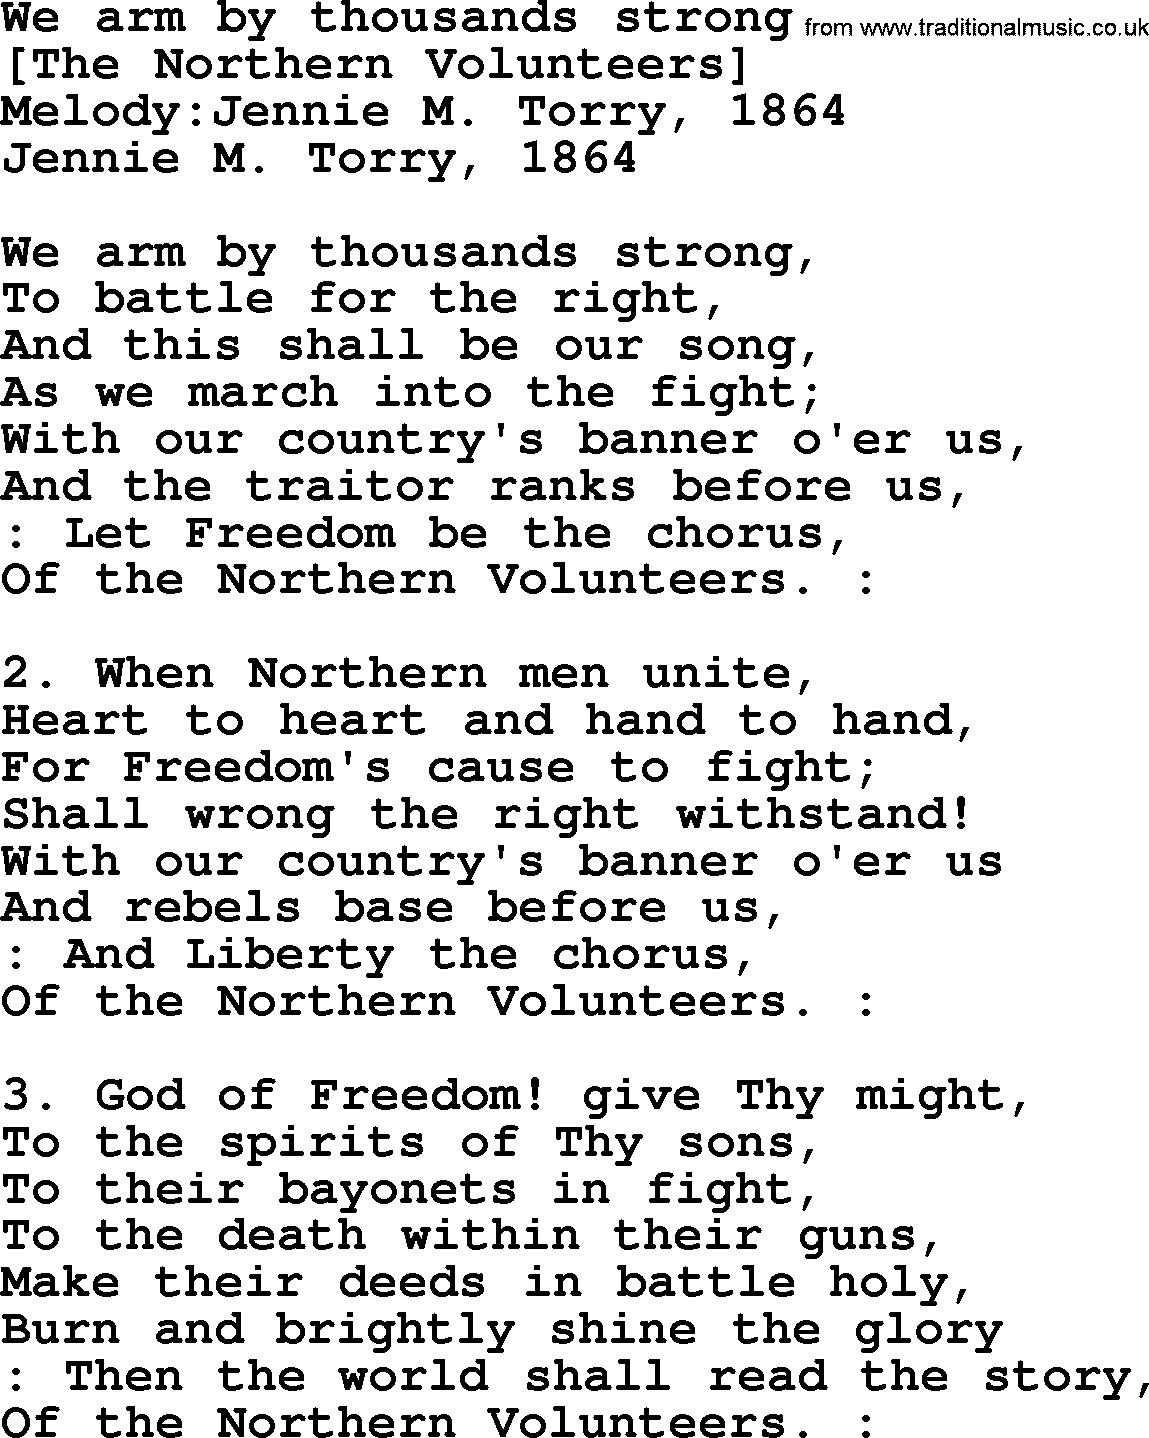 Old American Song: We Arm By Thousands Strong, lyrics